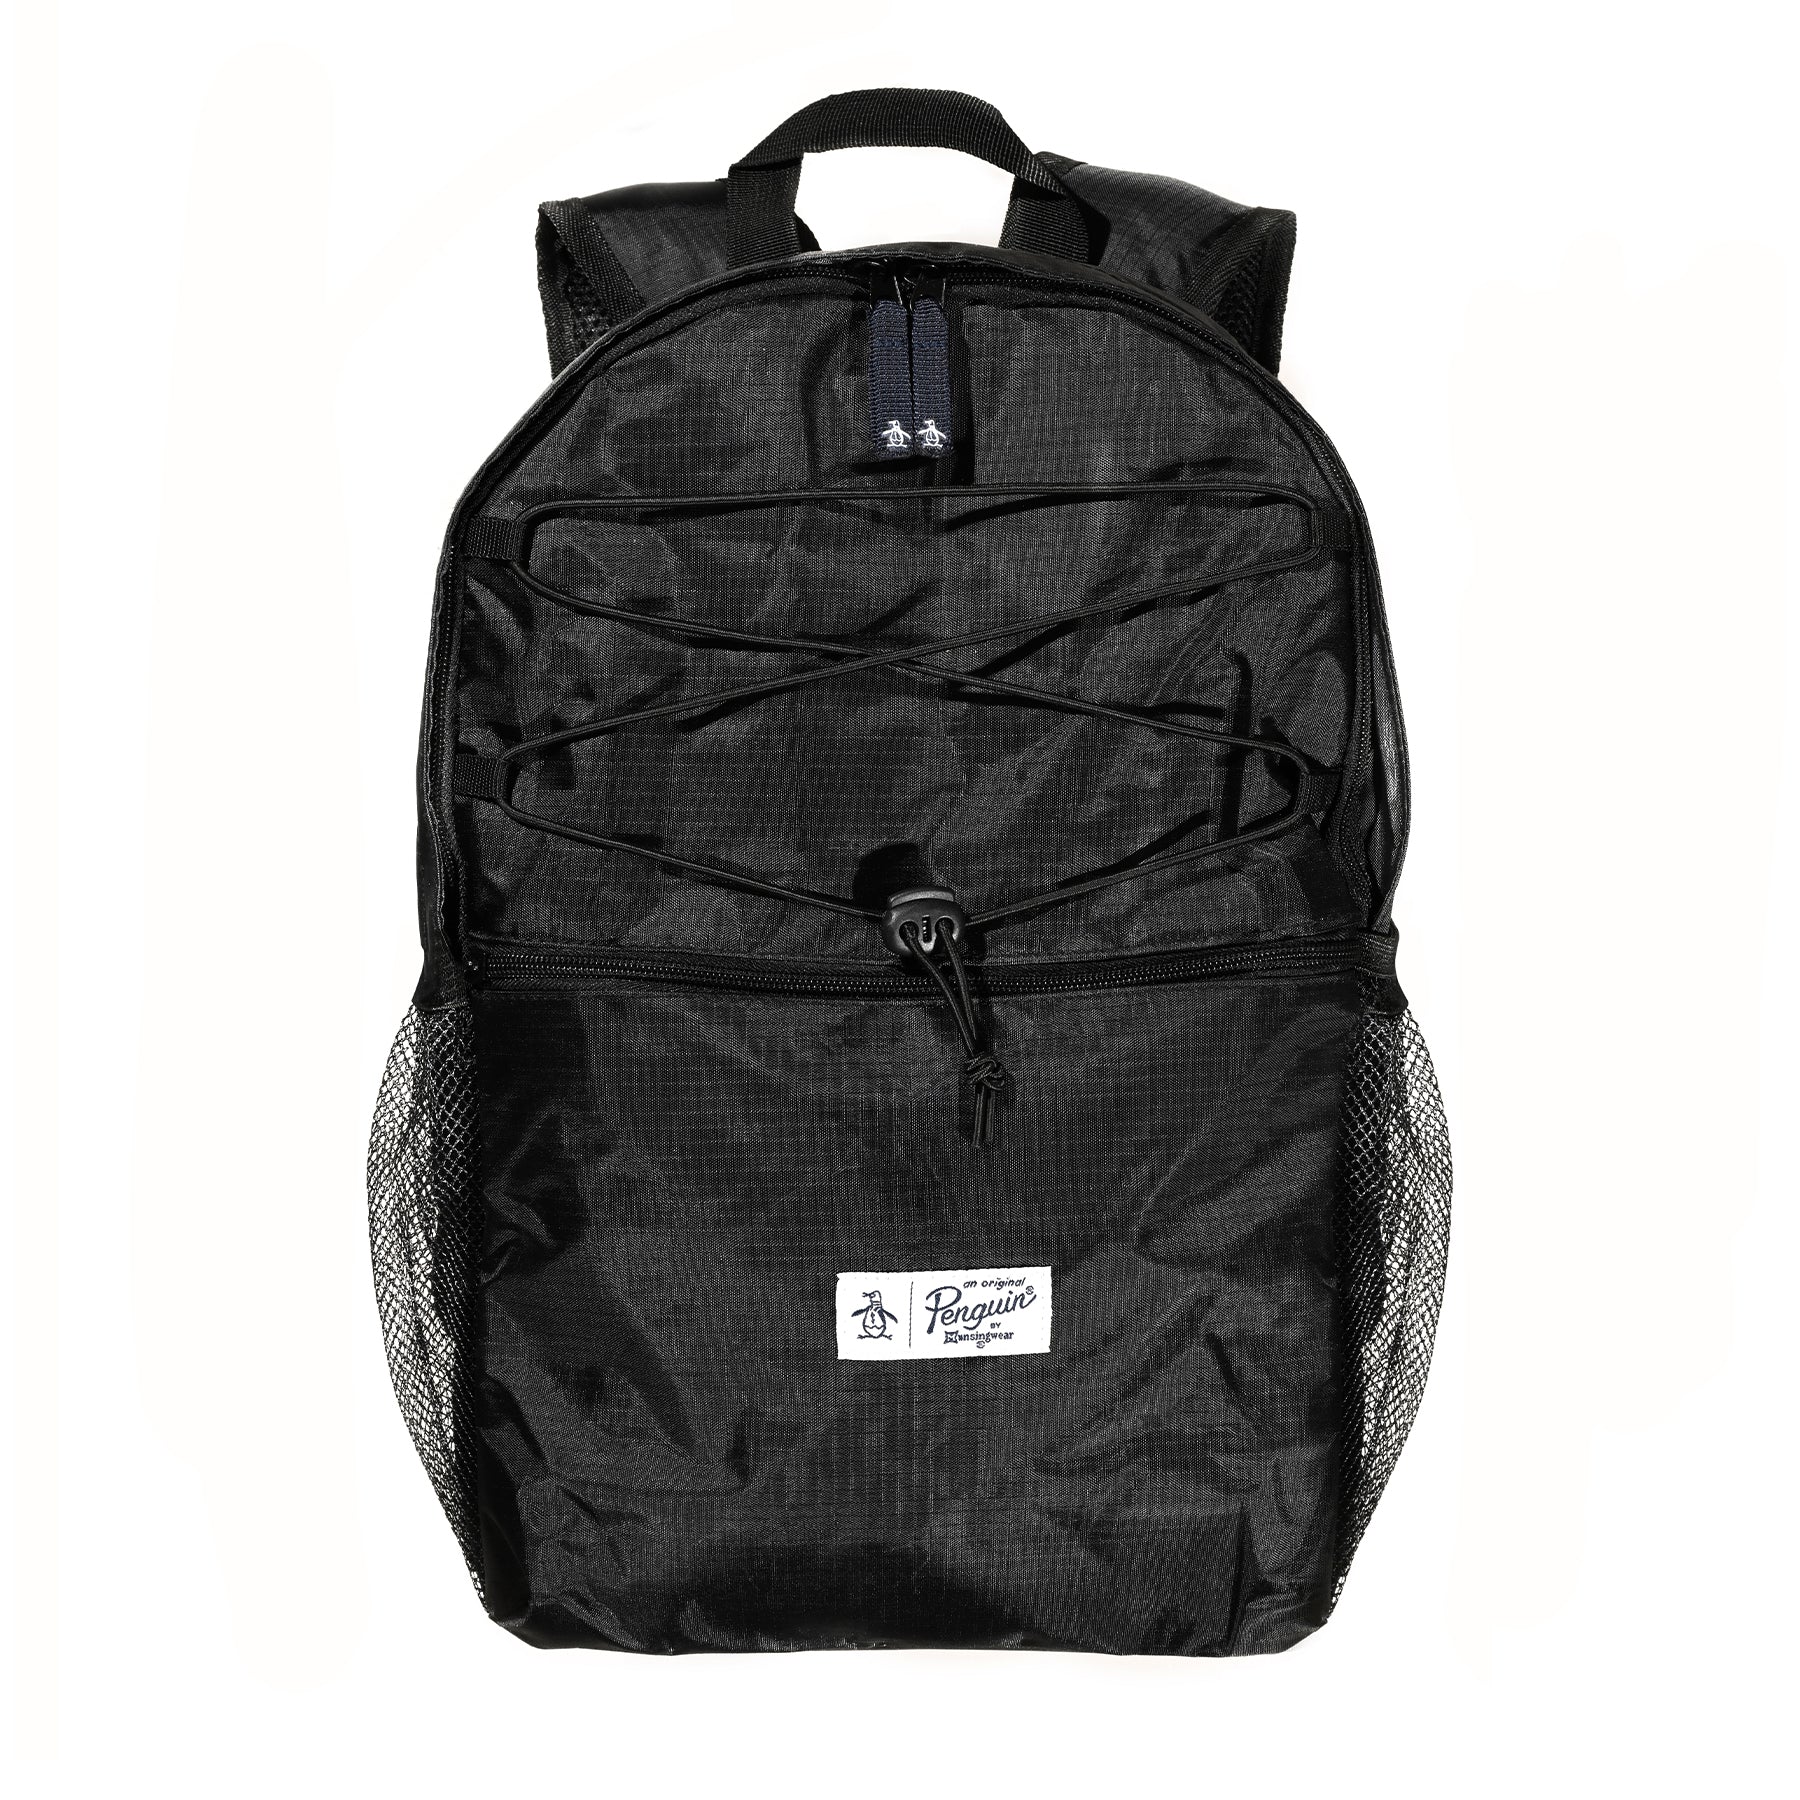 View Nessa Rip Stop Backpack With Bungee Cord In Black information